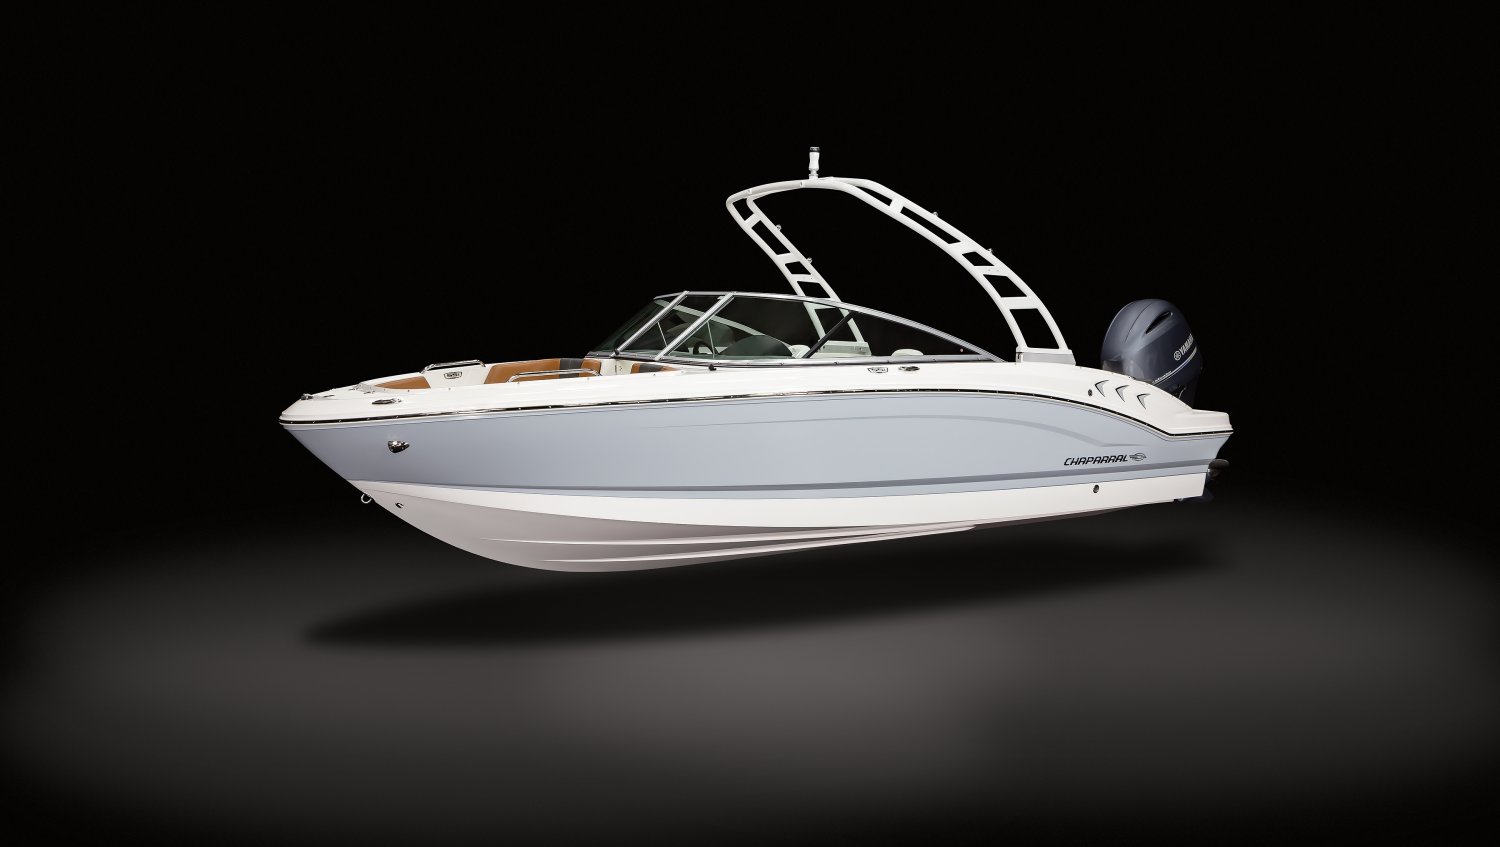 2023 Chaparral 21 SSi OB for sale at Goodhue Boat Company a Certified  Chaparral Dealership in Meredith, NH